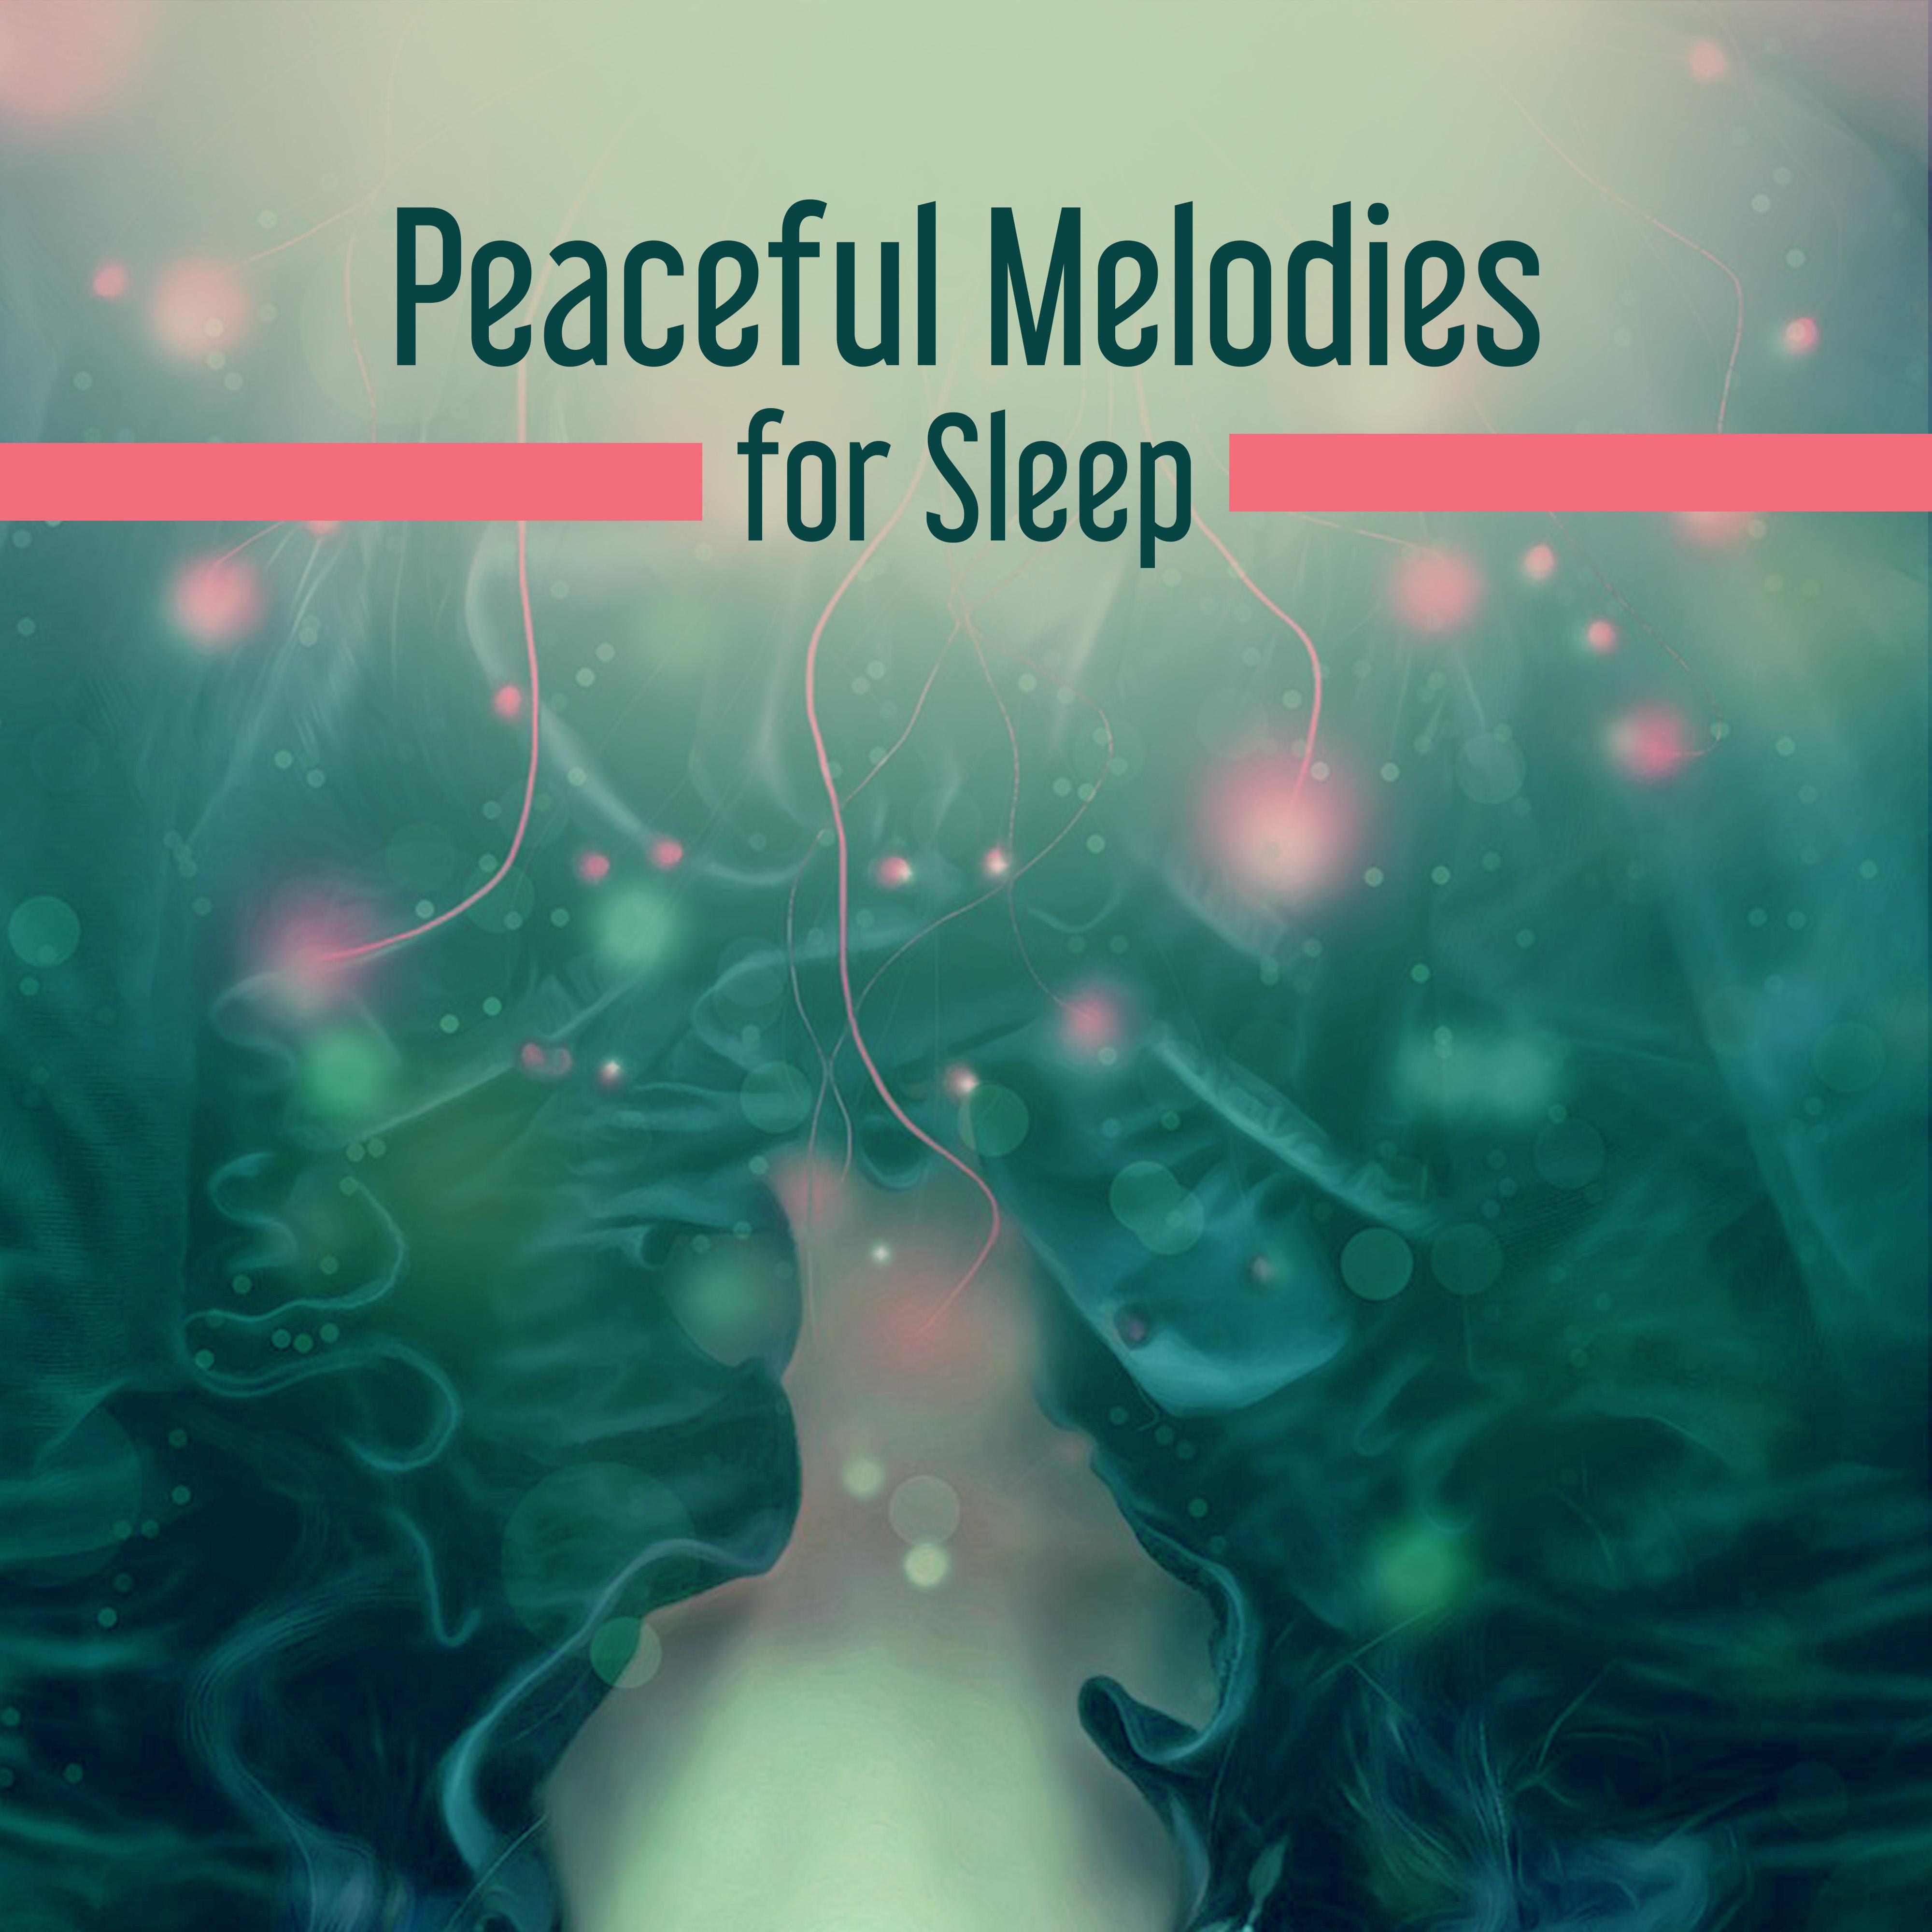 Peaceful Melodies for Sleep – Relaxing Sound Therapy, Pure Sleep, Music to Pillow, Pure Mind, Healing Lullabies